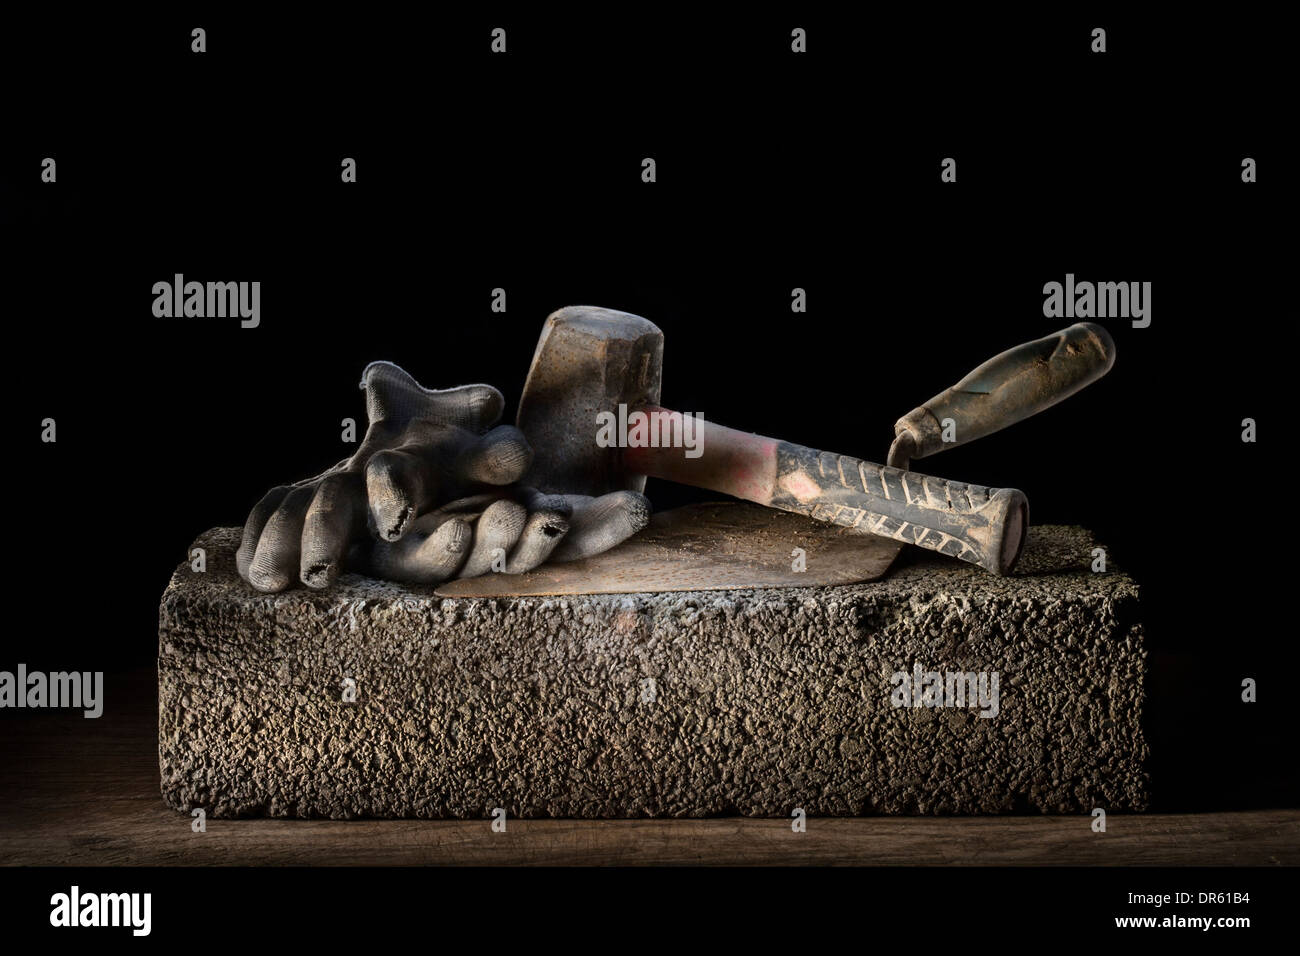 Builder's lump hammer, gloves and trowel resting on a concrete block. Stock Photo